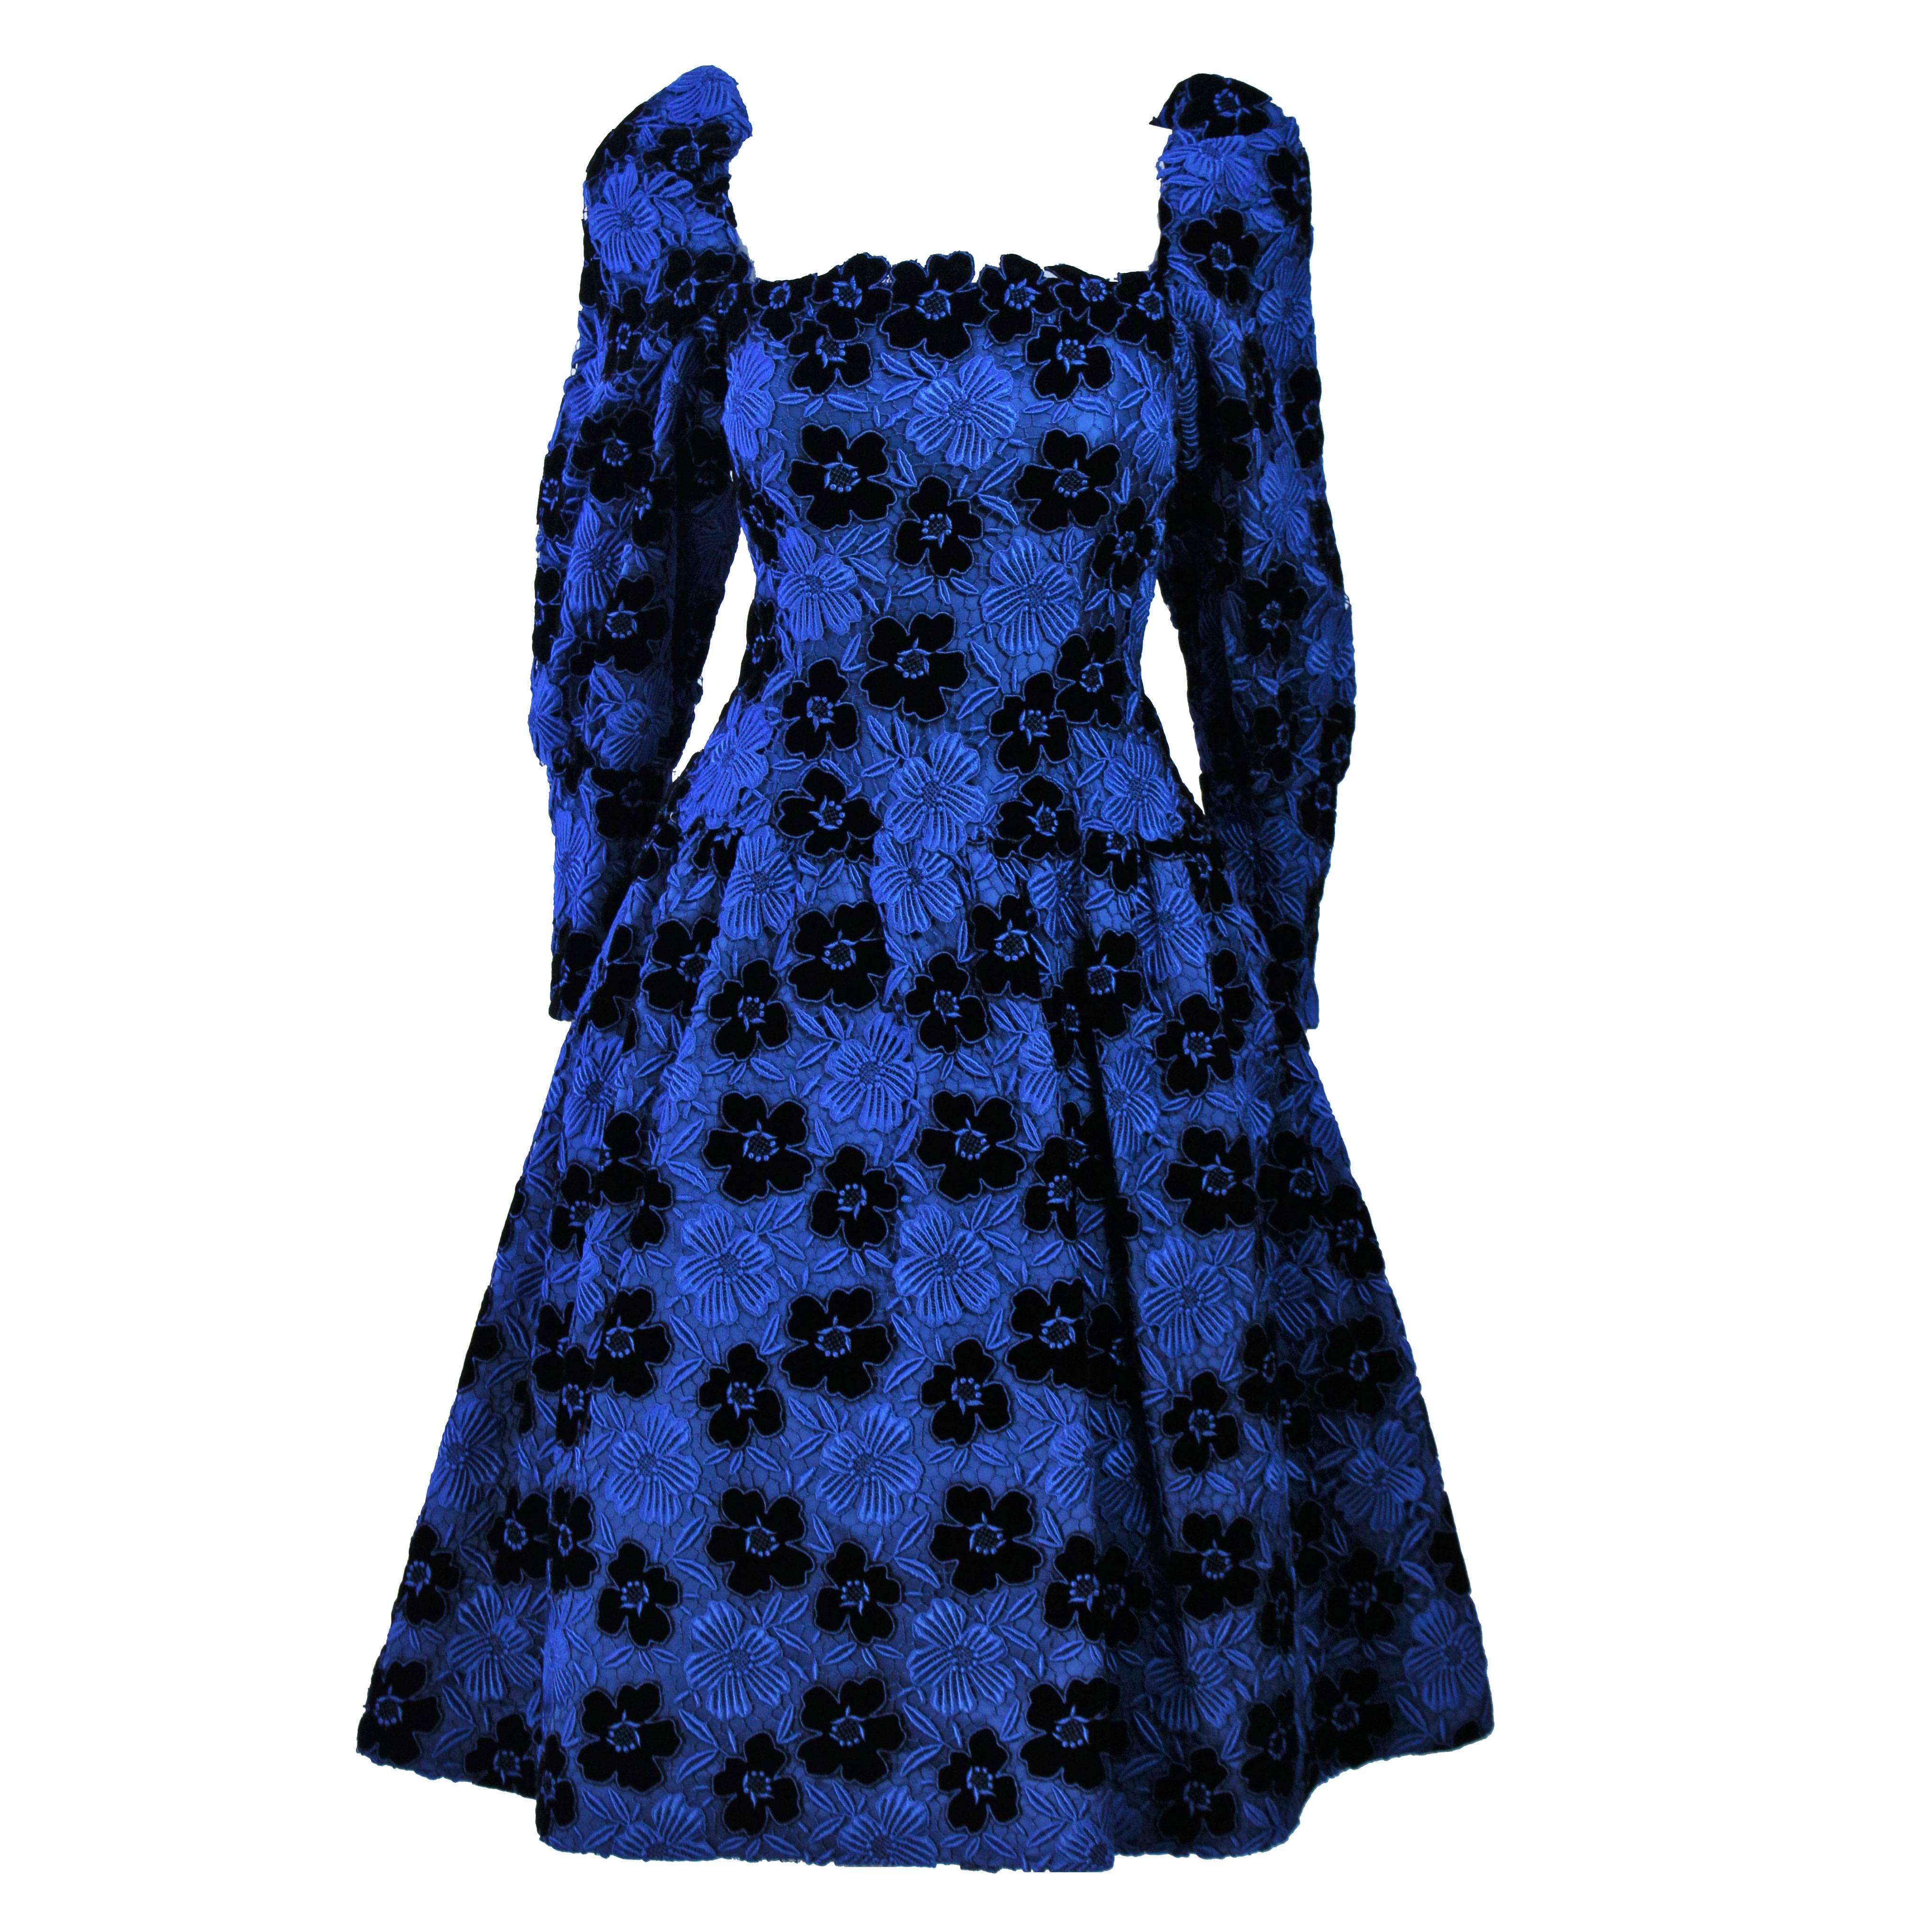 ARNOLD SCAASI Cobalt Blue Evening Dress with Floral Pattern Size 10-12